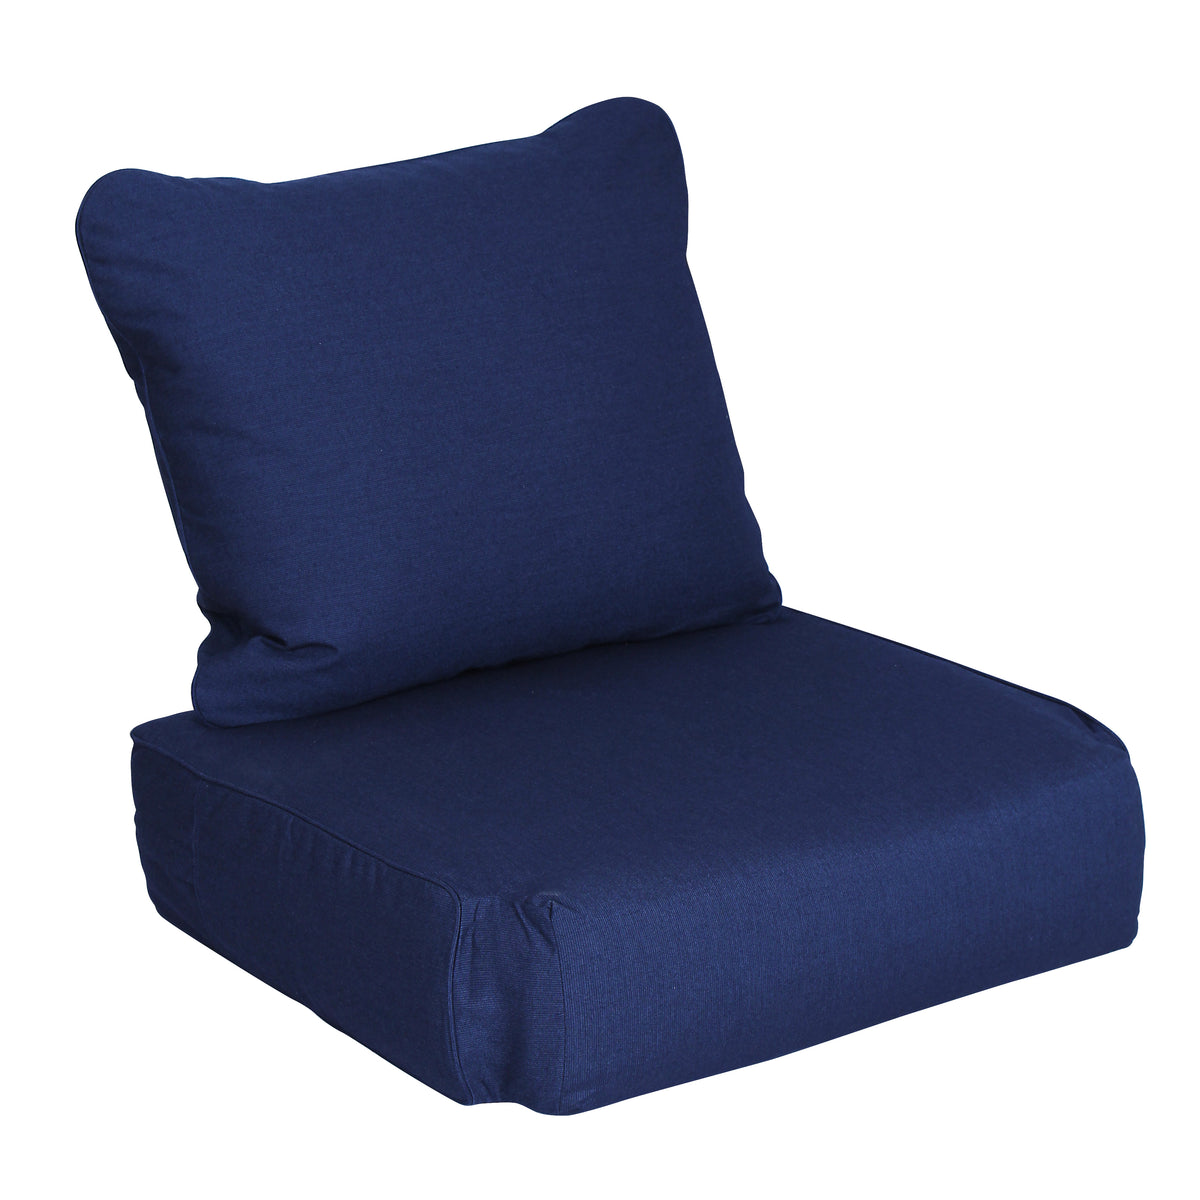 Sunbrella Indigo Outdoor Cushion Slipcover Replacement for Seating of